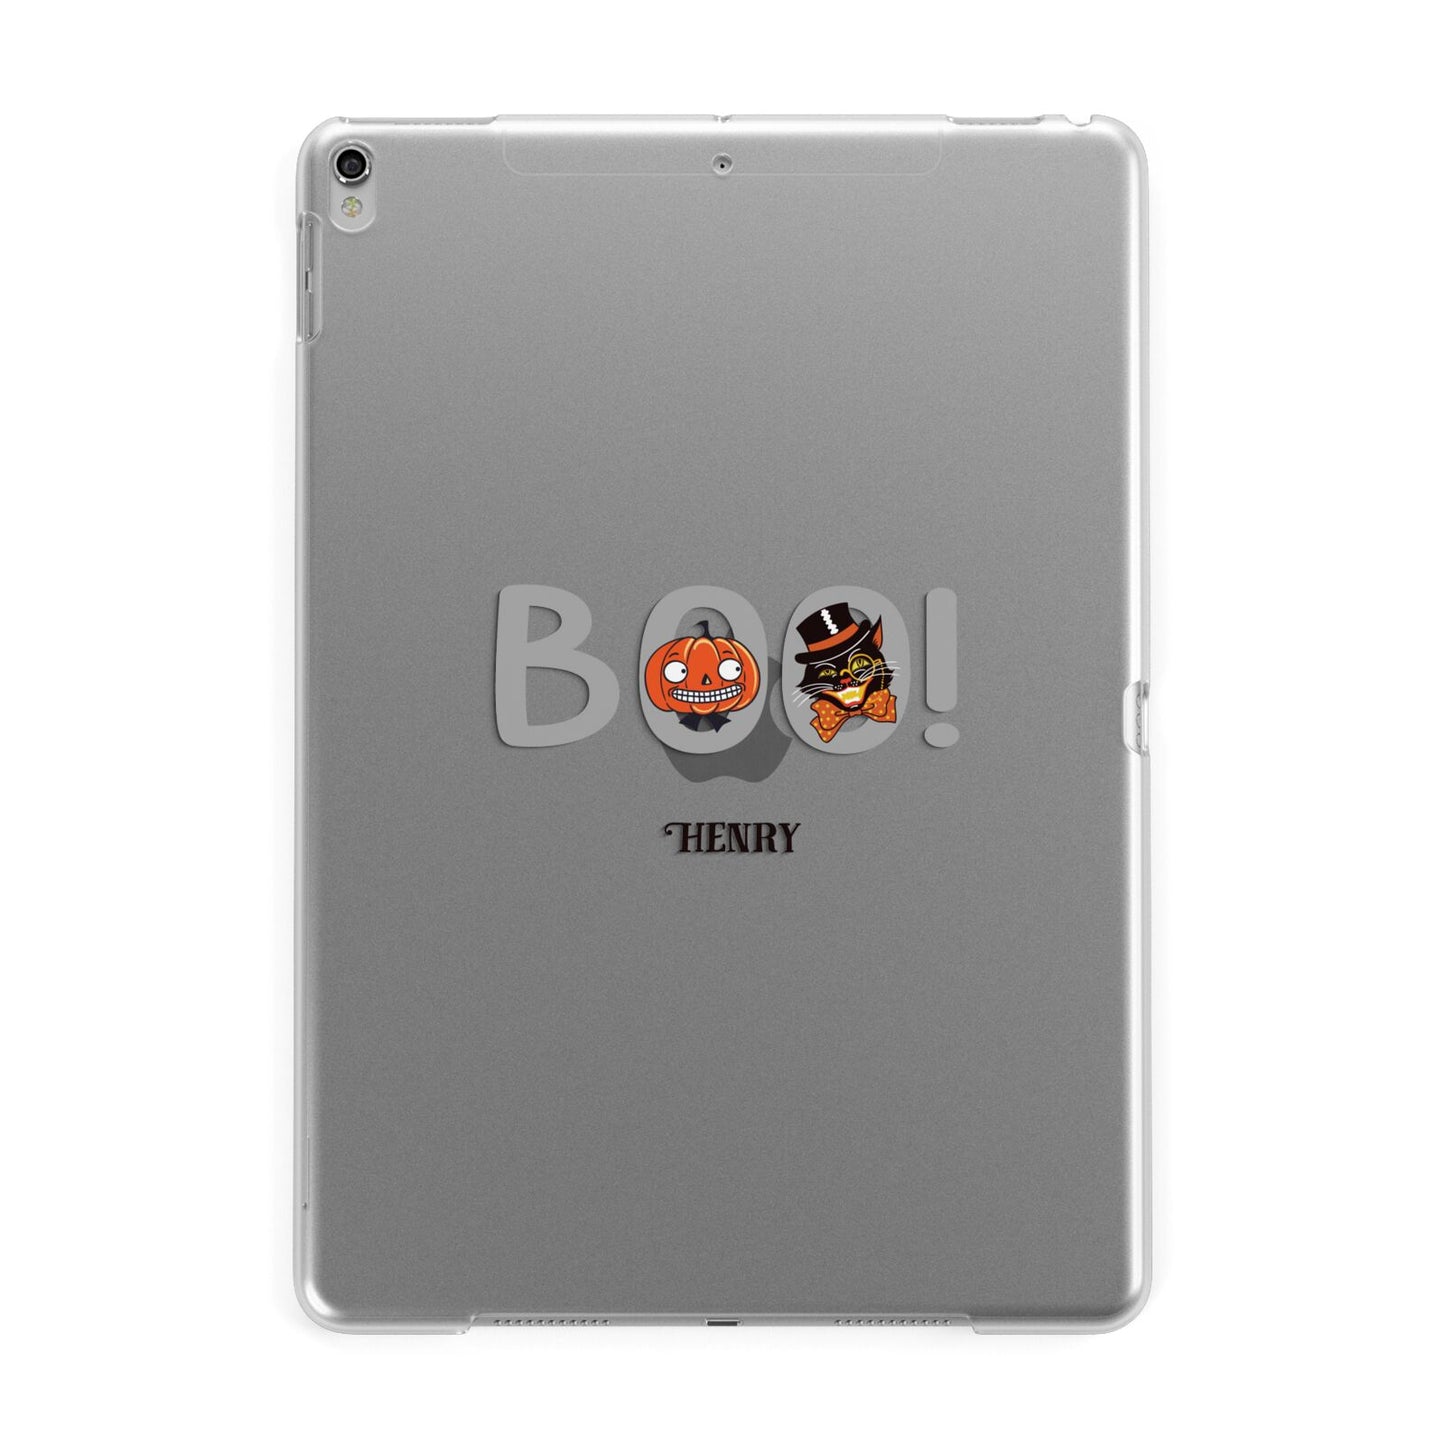 Boo Personalised Apple iPad Silver Case